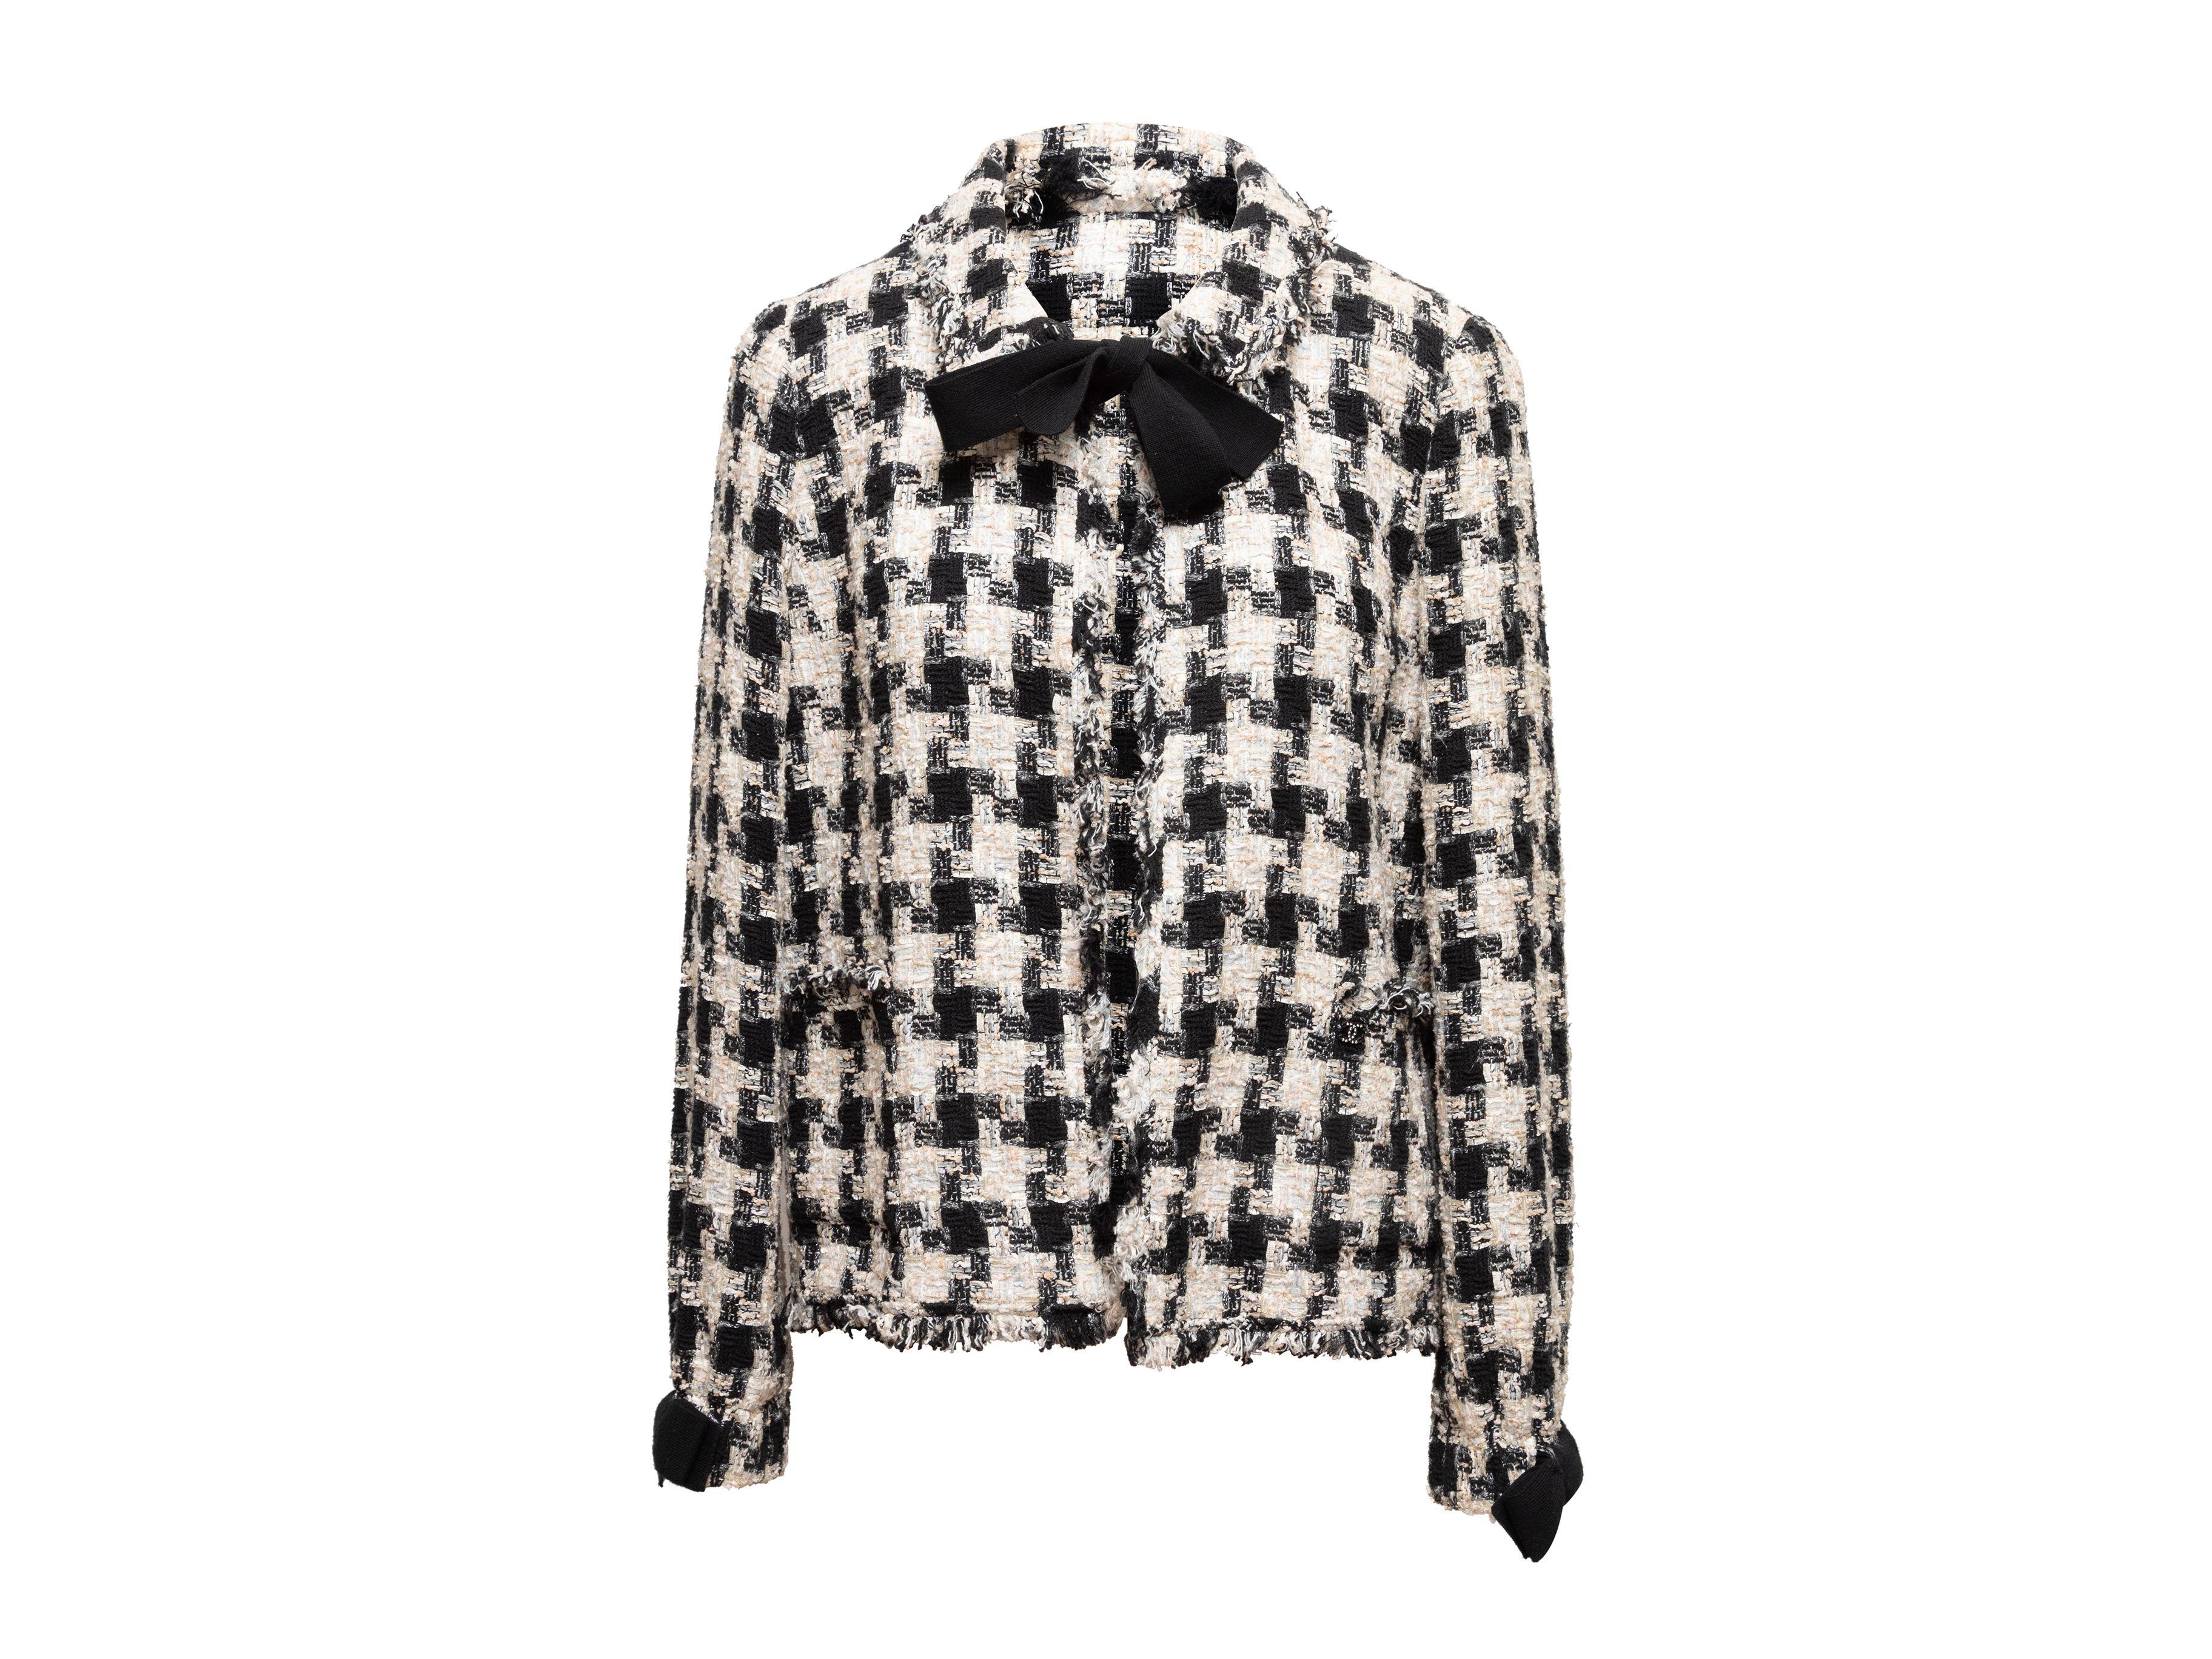 Chanel Fall 2004 Black & White Houndstooth Tweed Jacket 3